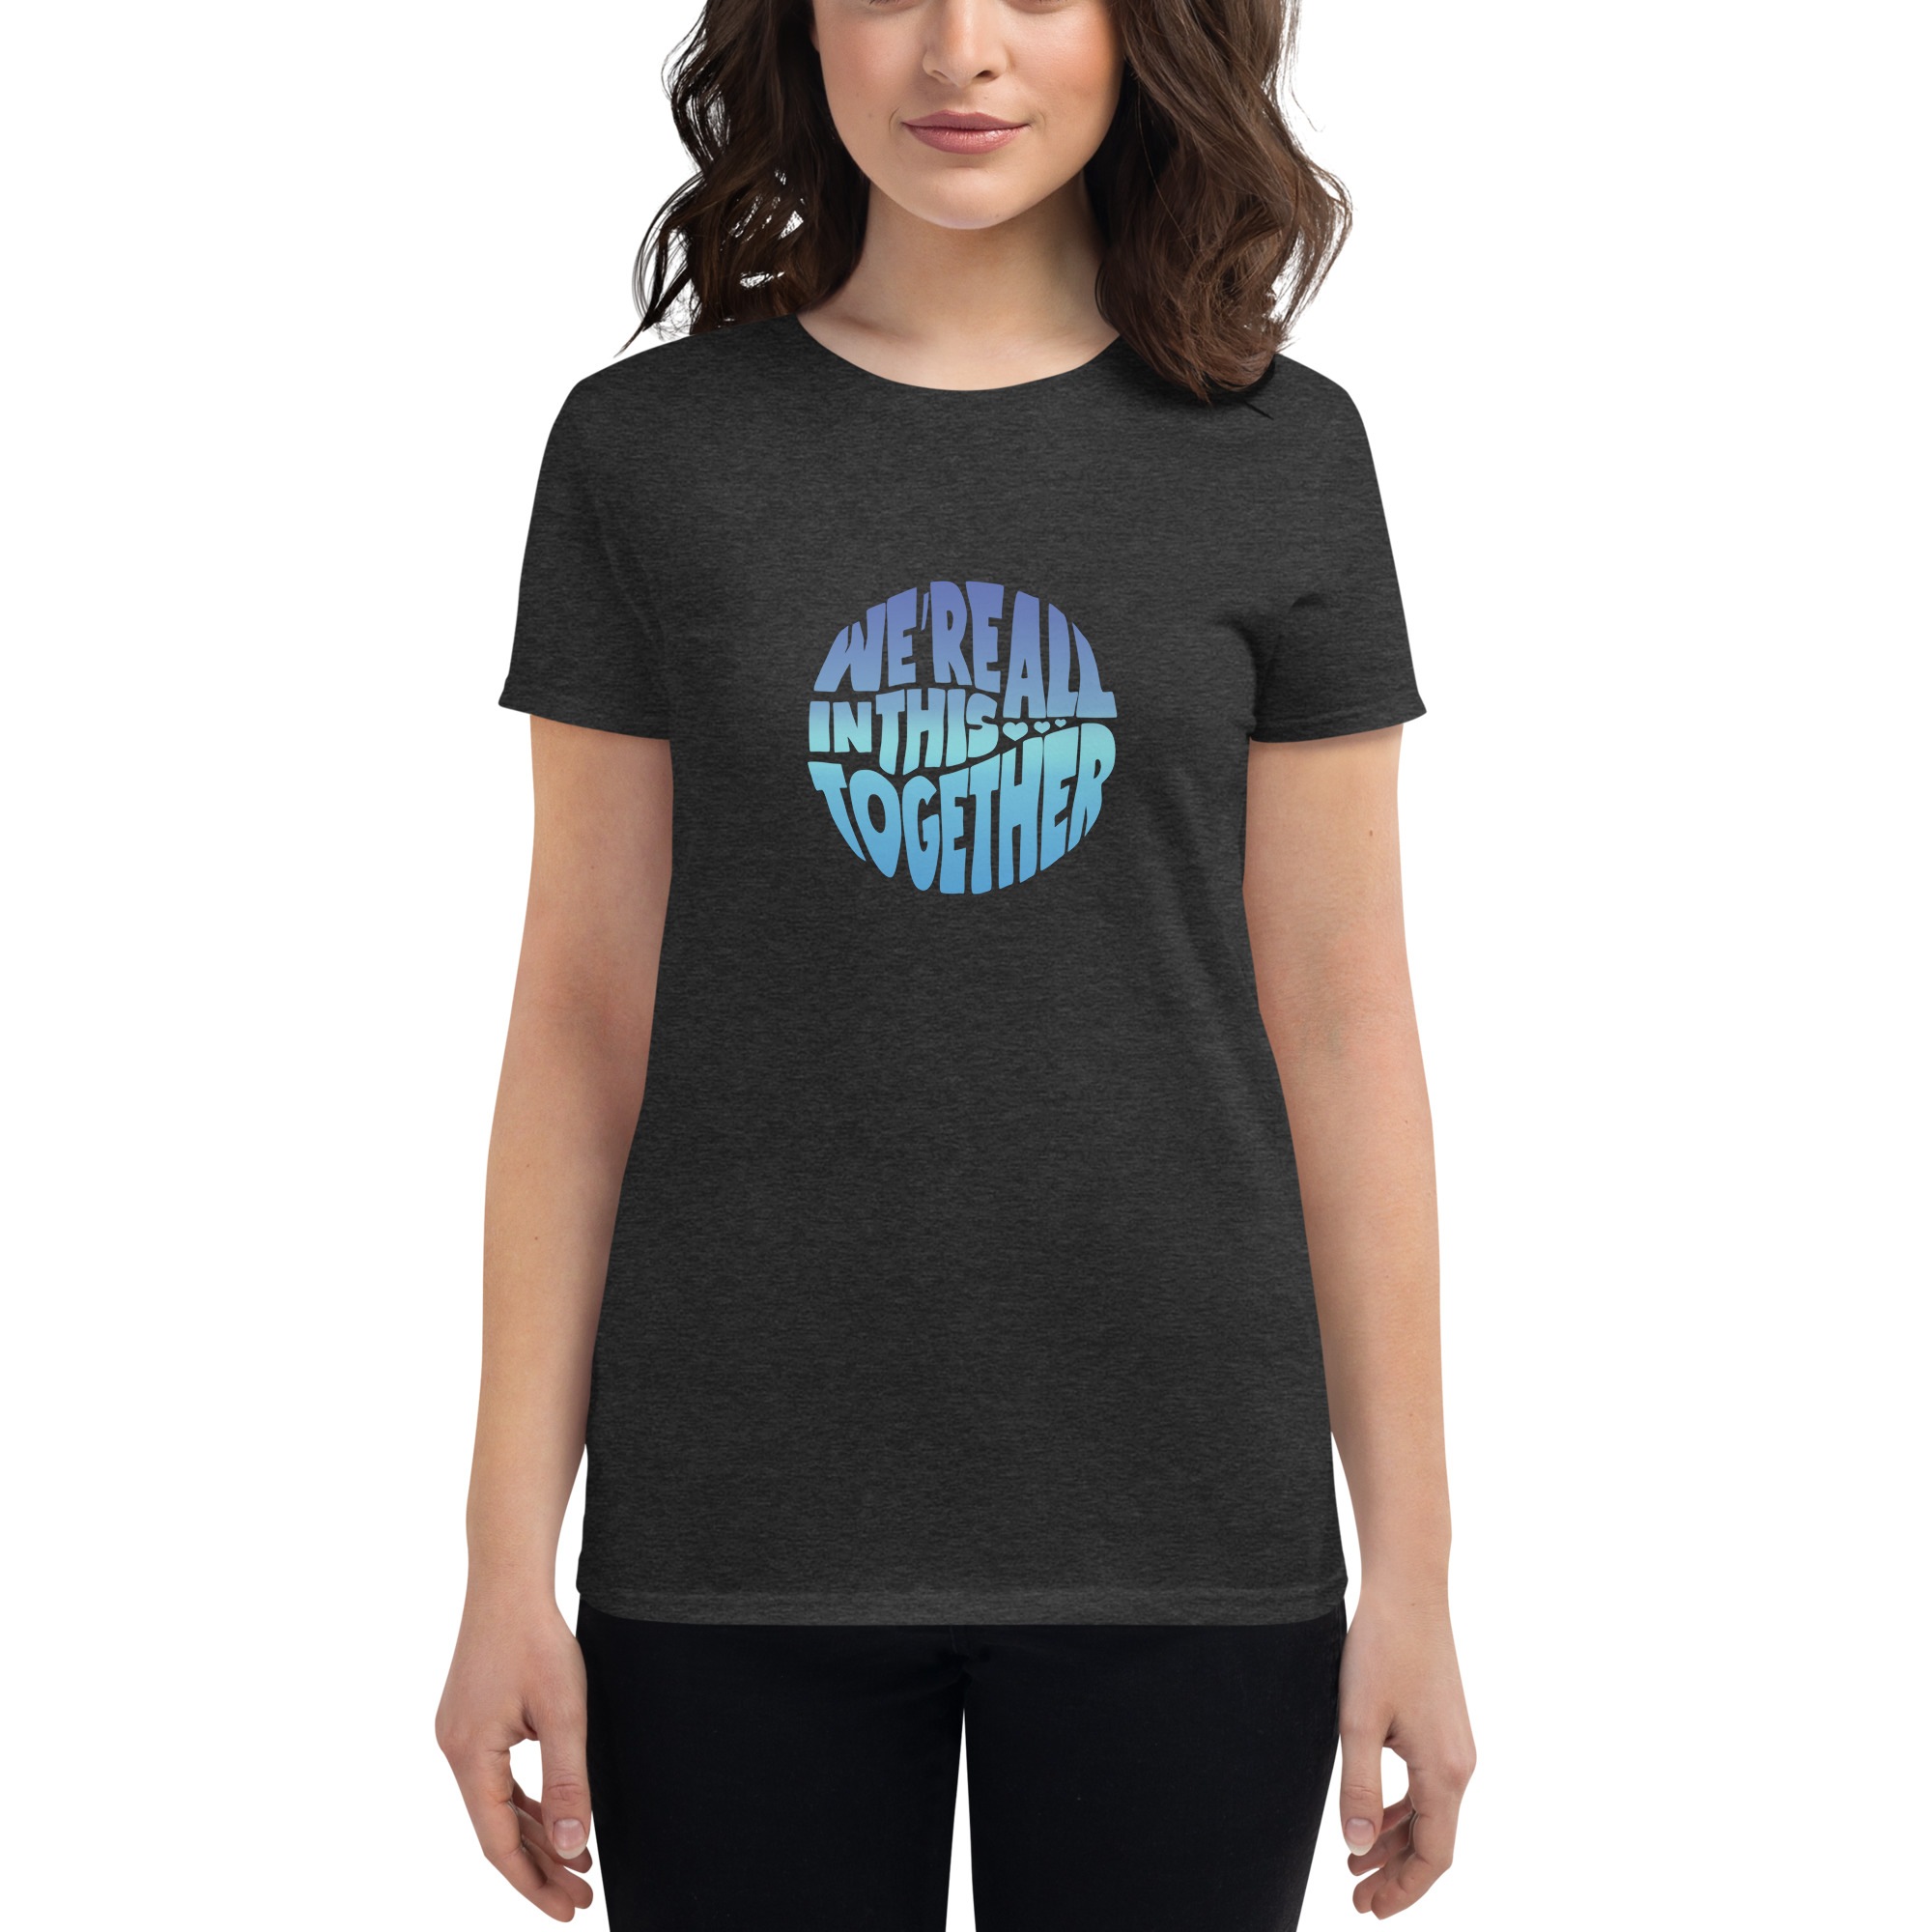 We're All In This Together Tshirt